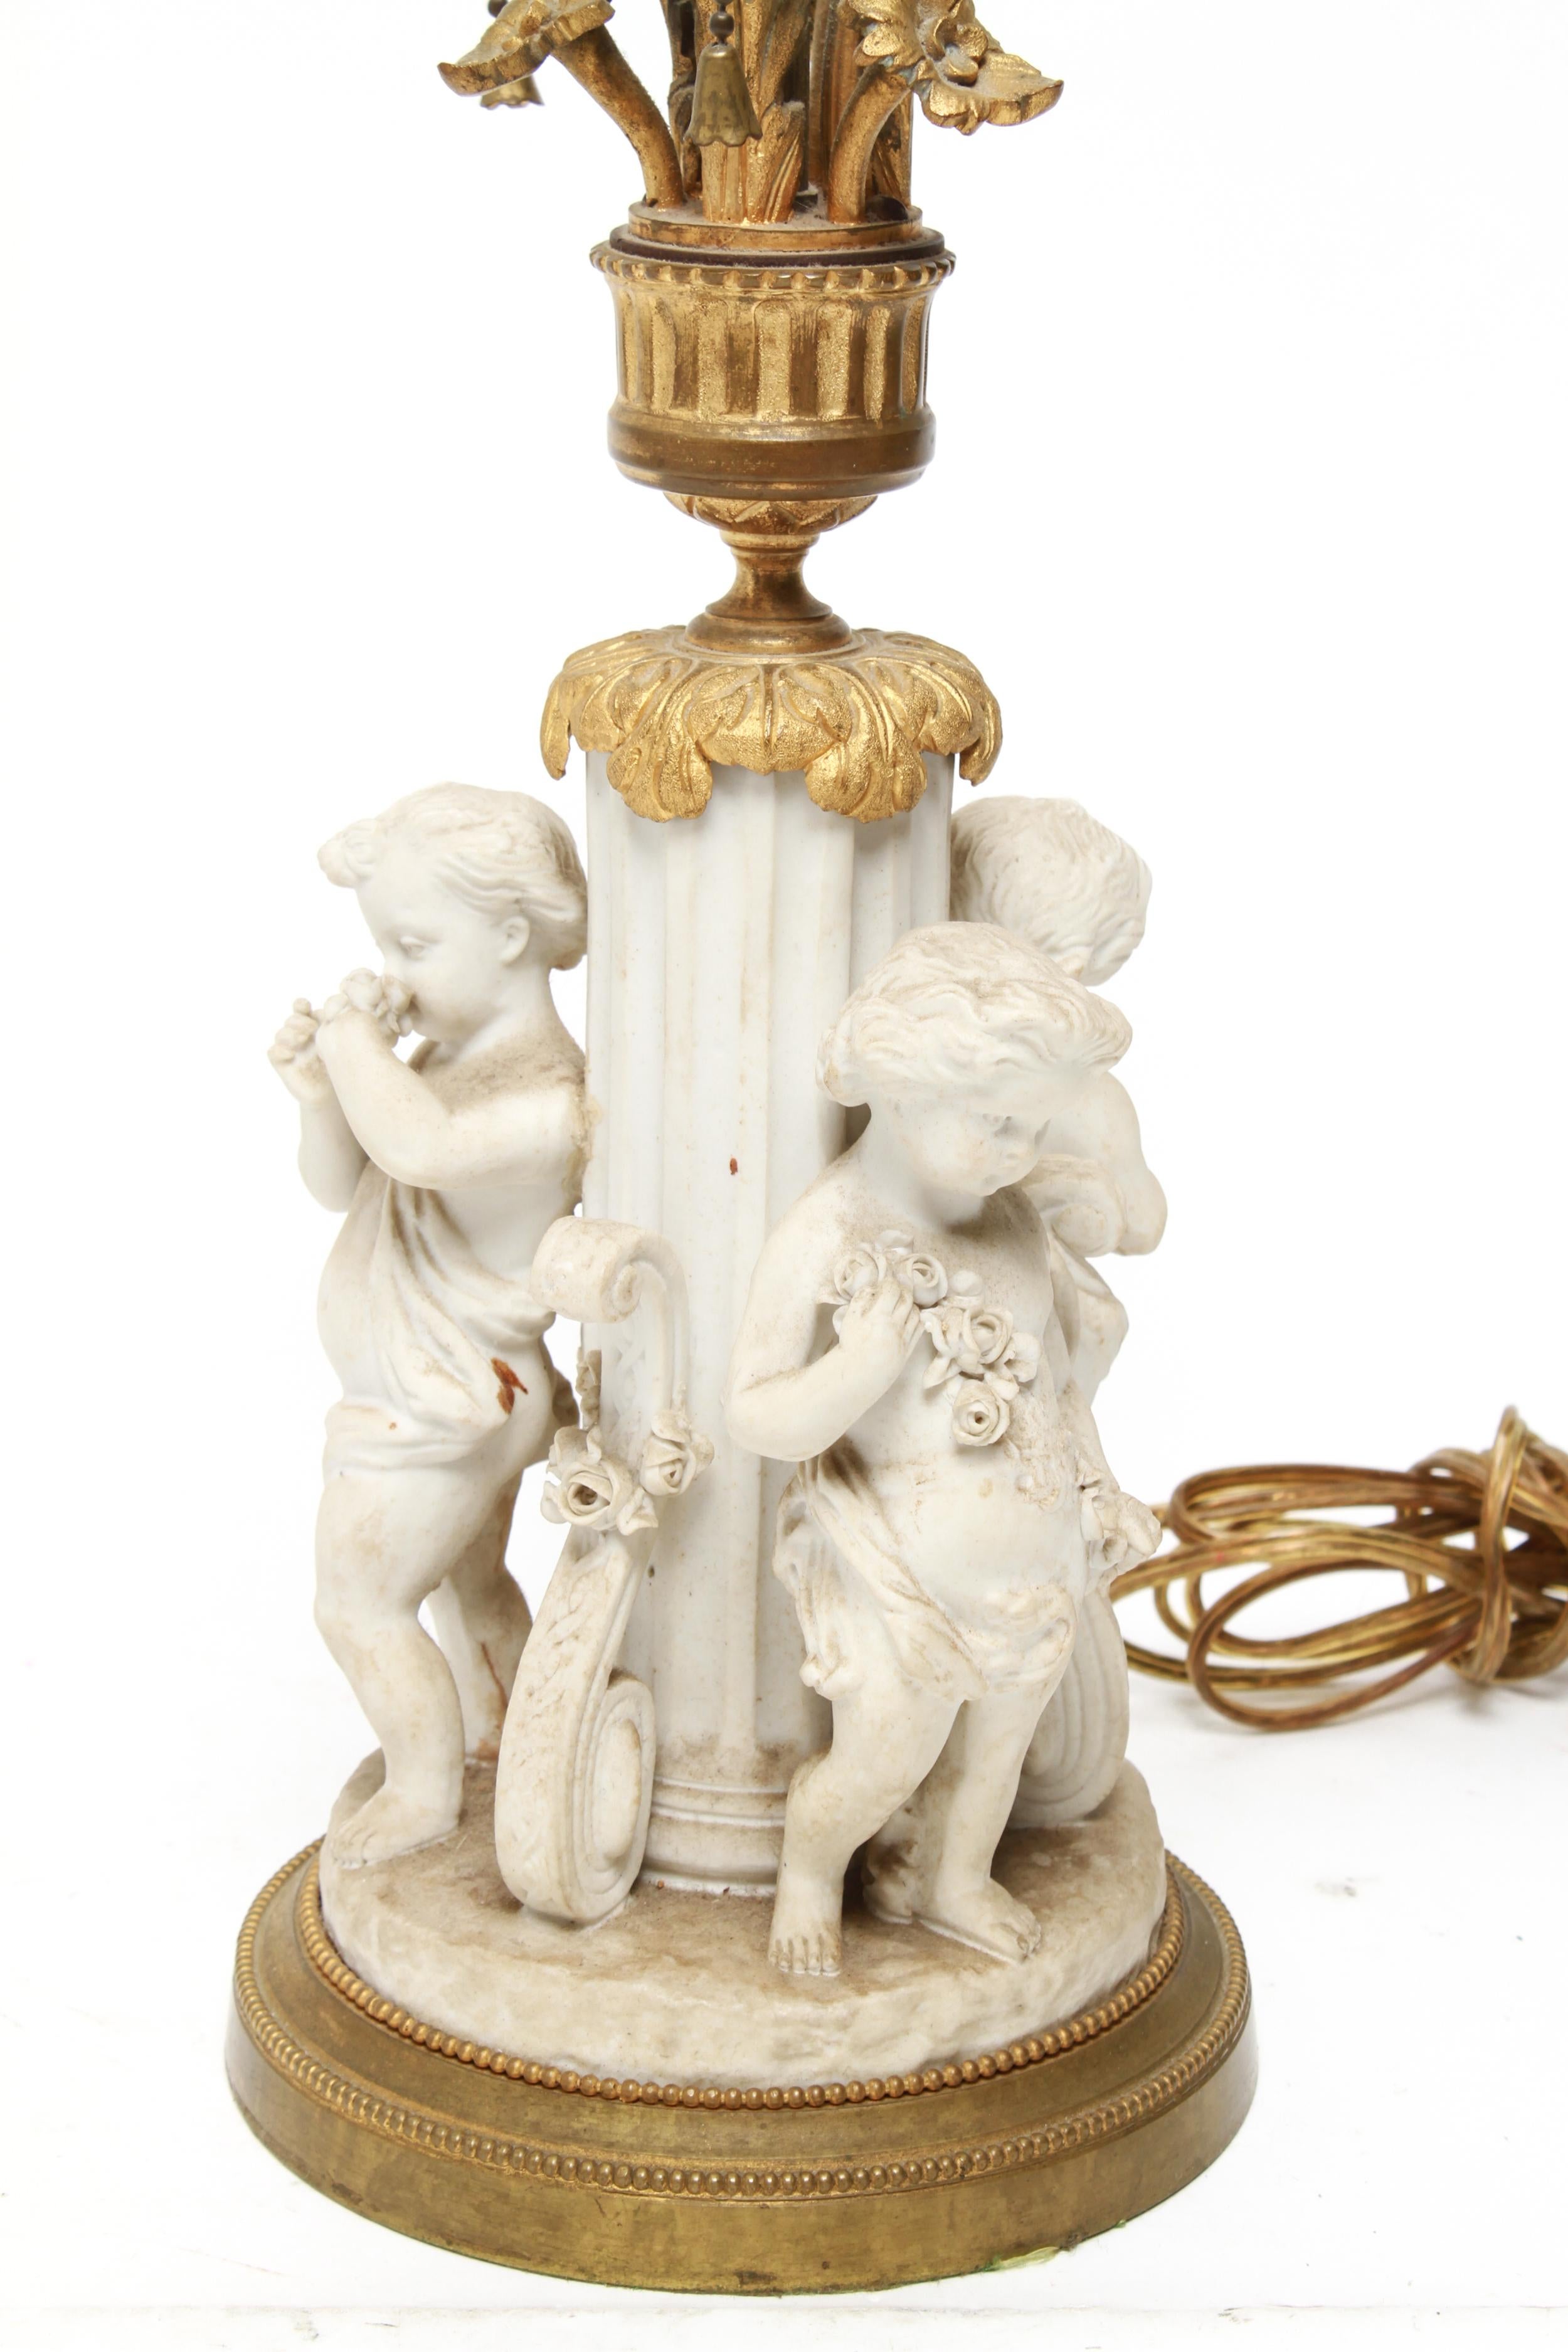 Parian bisque porcelain table lamp with three light sockets above a classical column base surrounded by cherubs and decorative brackets. The top has ormolu mounts. In great vintage condition with an old dark paint mark.